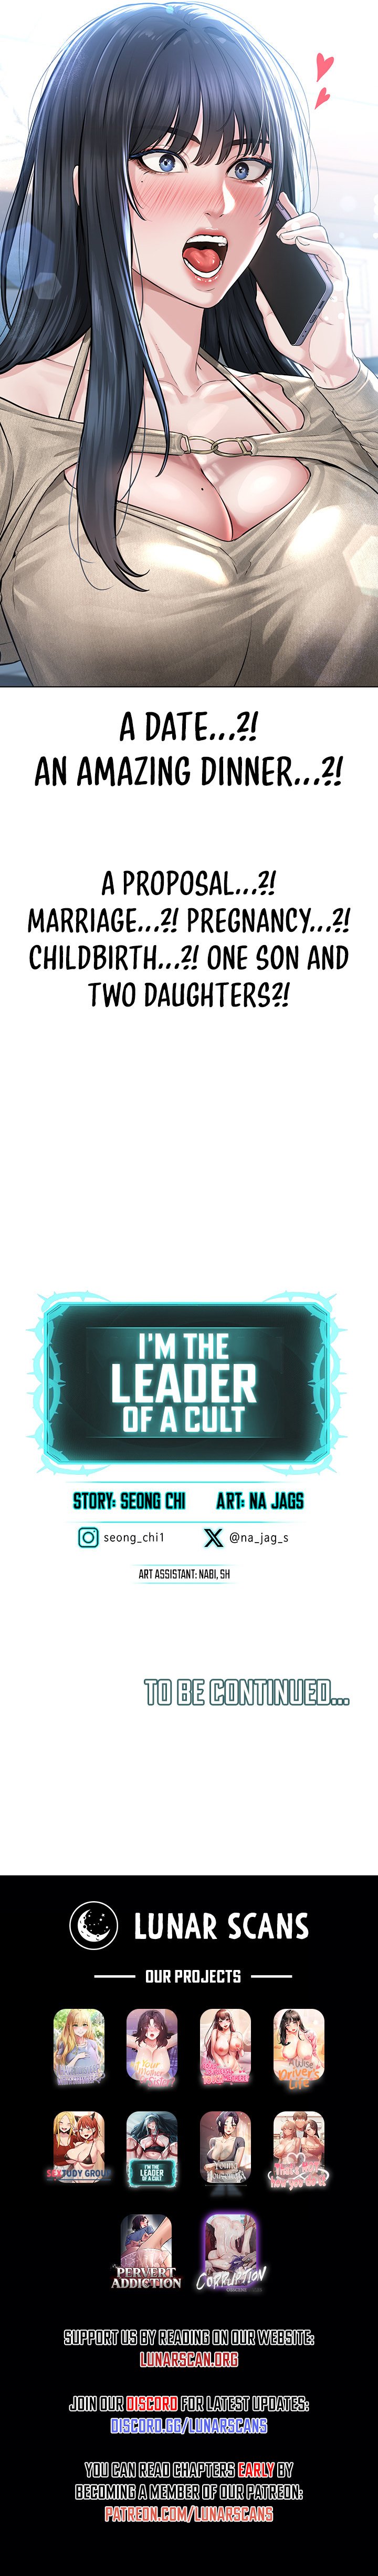 im-the-leader-of-a-cult-chap-20-11